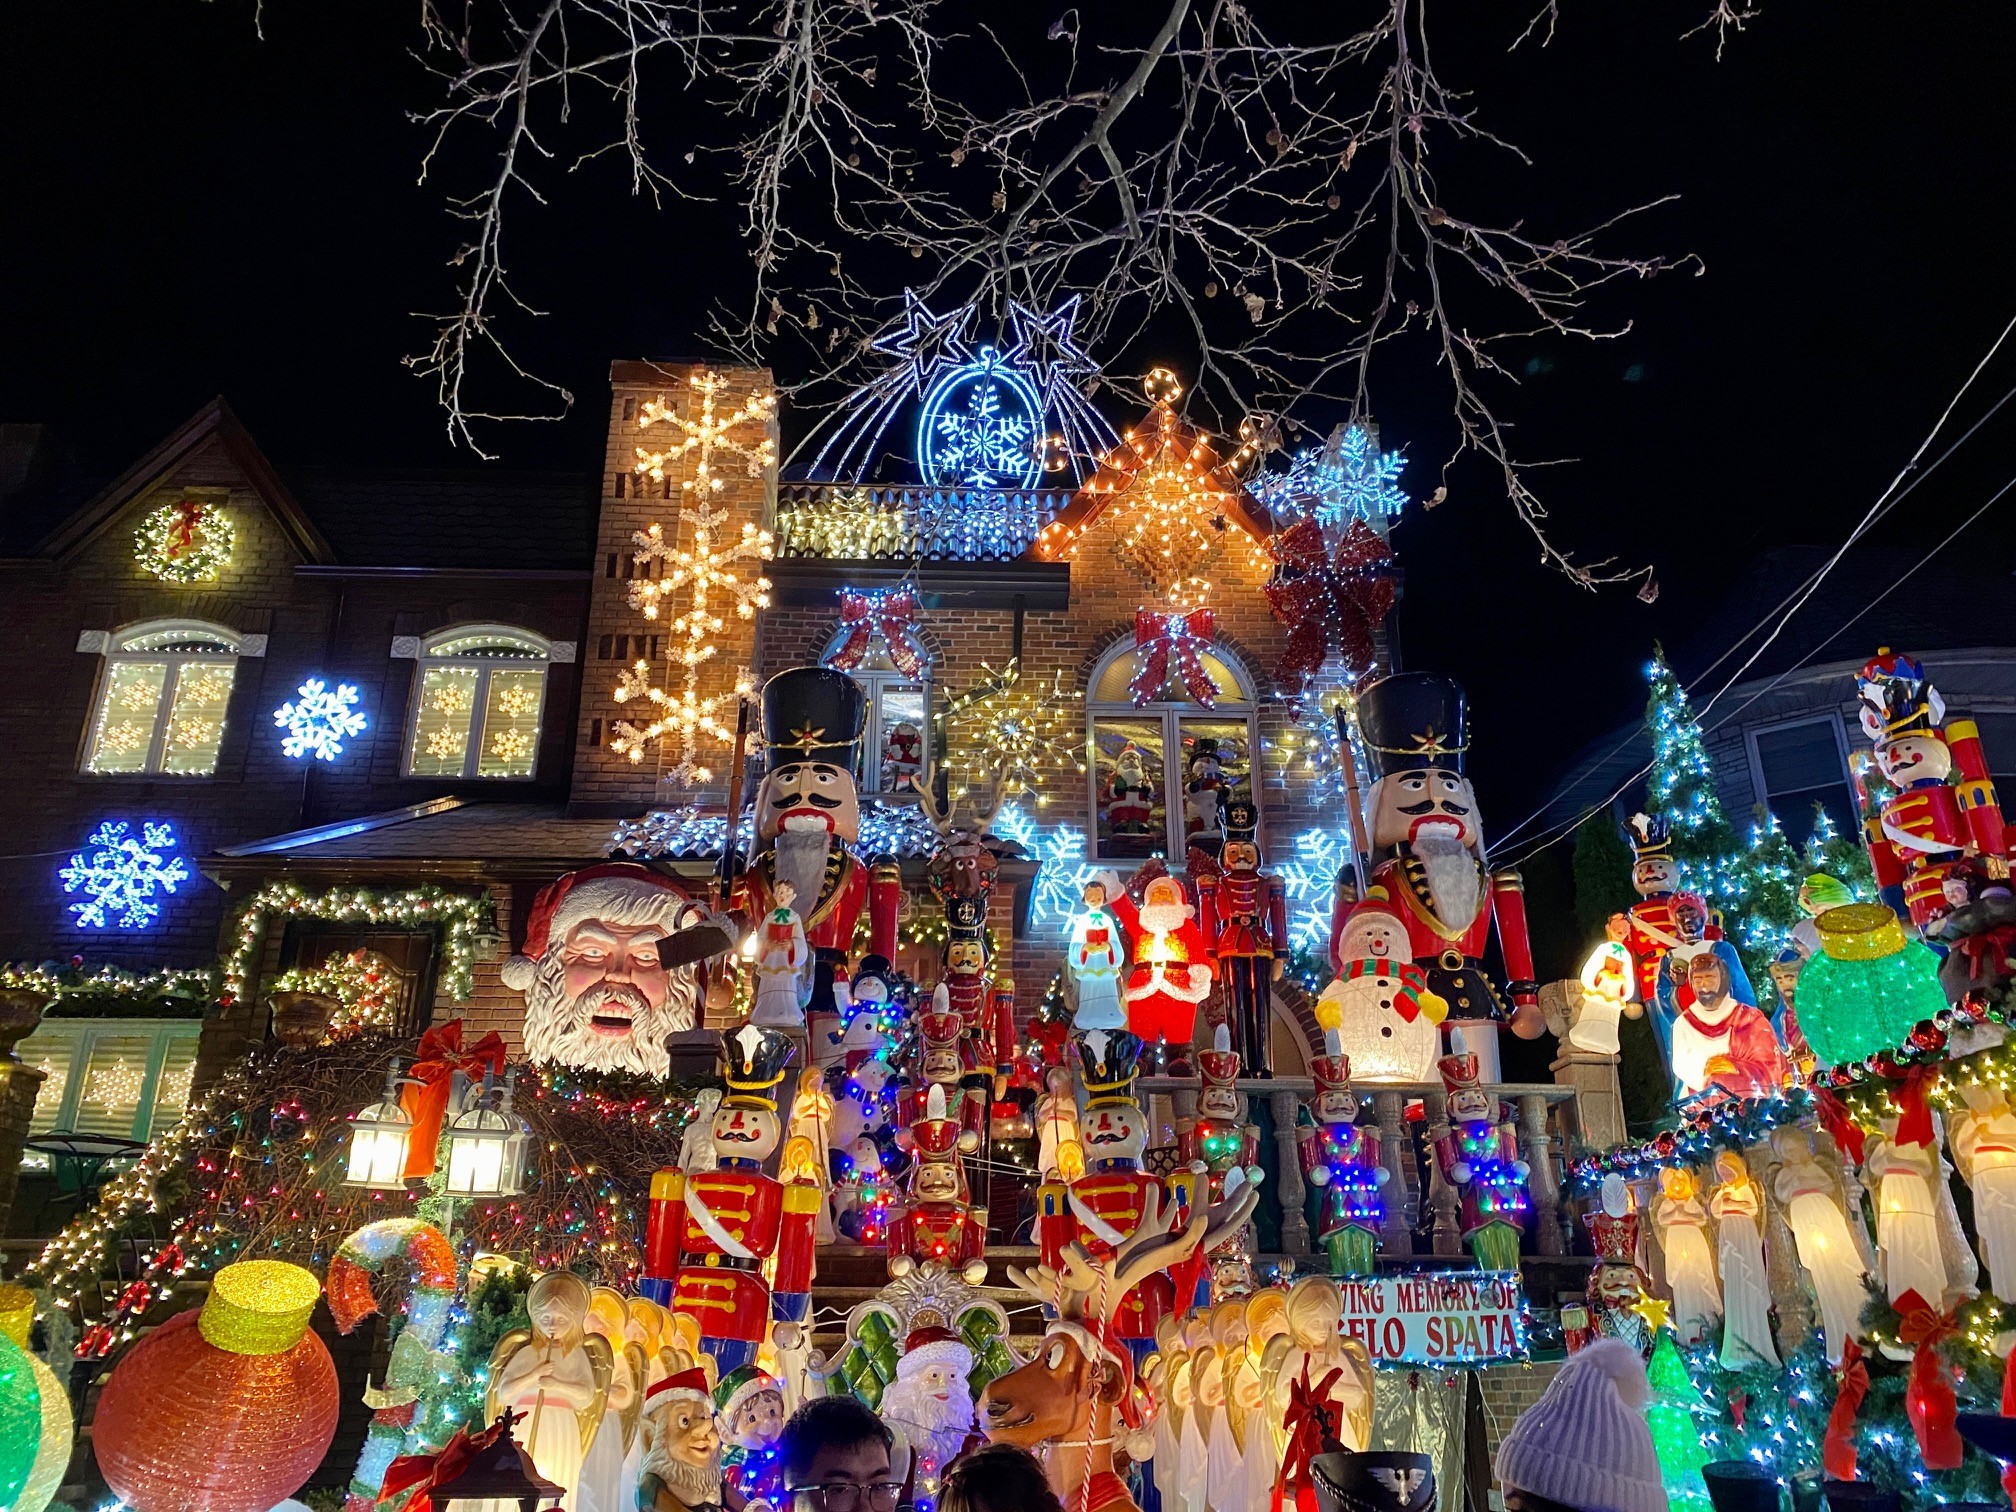 It’s hard to imagine a Christmas without the over-the-top lights displays of the houses in Dyker Heights in Brooklyn |